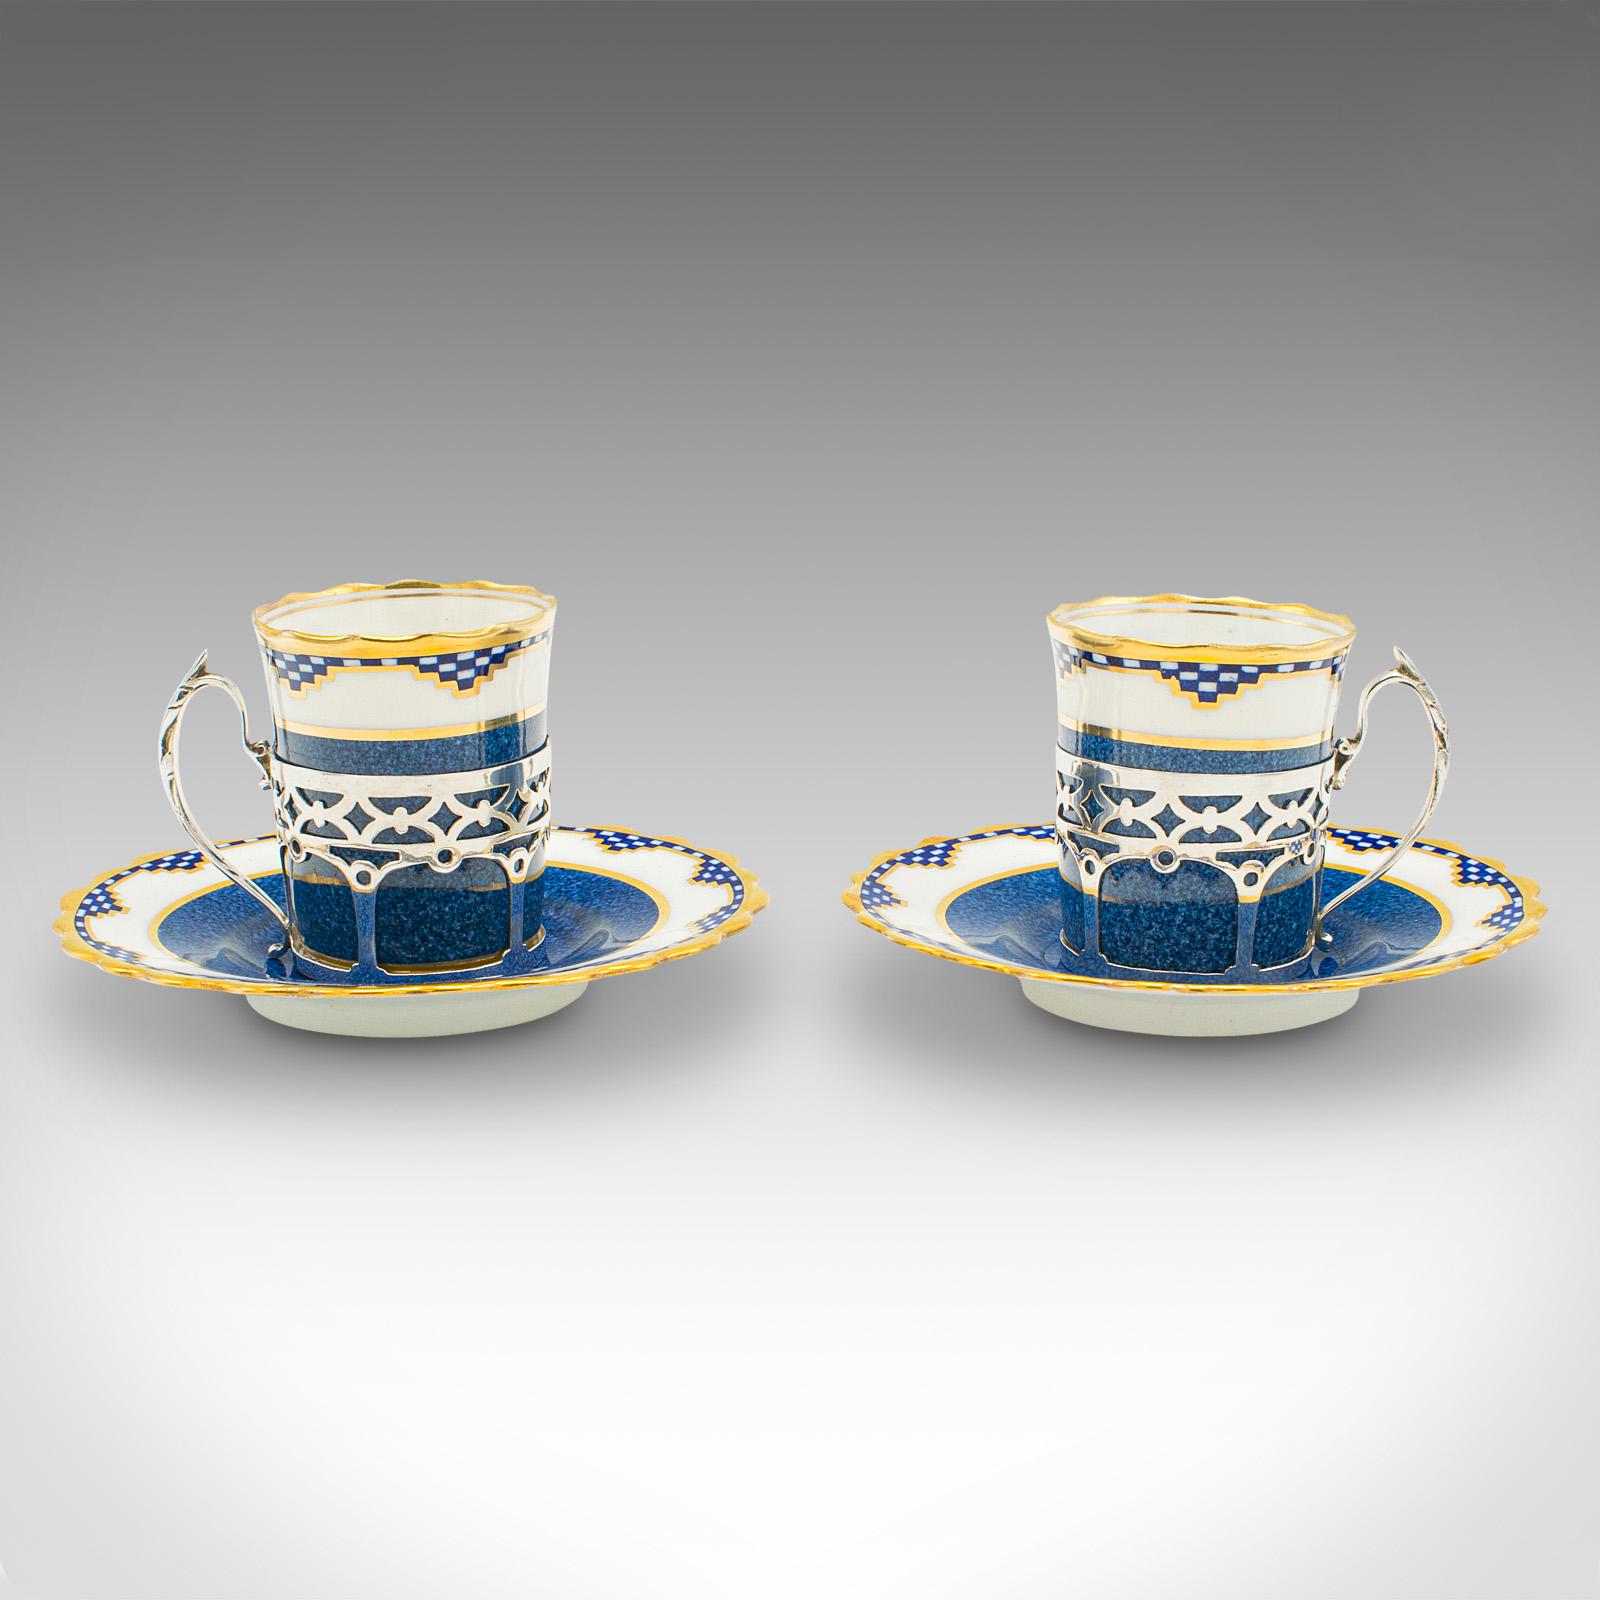 This is a set of 4 vintage cups and saucers. An English, ceramic and hallmarked silver coffee can by Aynsley, dating to the early 20th century, circa 1930.

Wonderfully petite with striking silver handles
Displaying a desirable aged patina and in